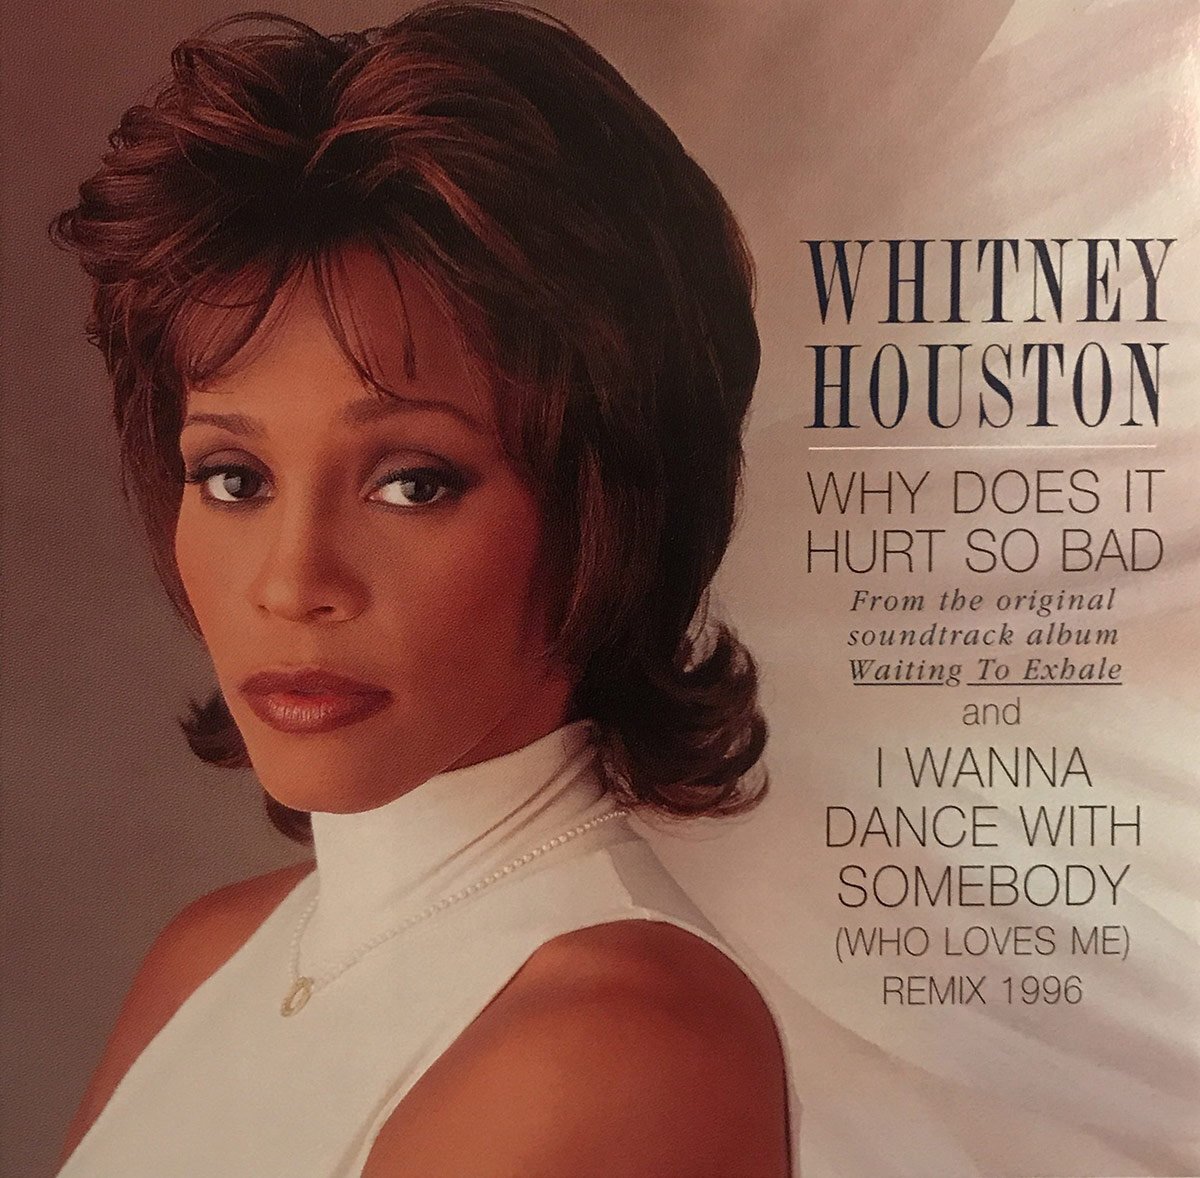 <p>While the song was undeniably successful, it didn’t end up among Whitney’s <a href="https://books.google.ca/books?id=wwcEAAAAMBAJ&pg=PA106&redir_esc=y#v=onepage&q&f=false">high-charting singles</a>—but it still remains one of her best. With her signature stellar vocals, understated background instrumentals and lovelorn lyrics, <a href="https://www.whitneyhouston.com/en-ca/video/why-does-it-hurt-so-bad-mtv-movie-awards-1996/">“Why Does It Hurt So Bad”</a> absolutely nails the recipe for a perfect R&B ballad.</p>